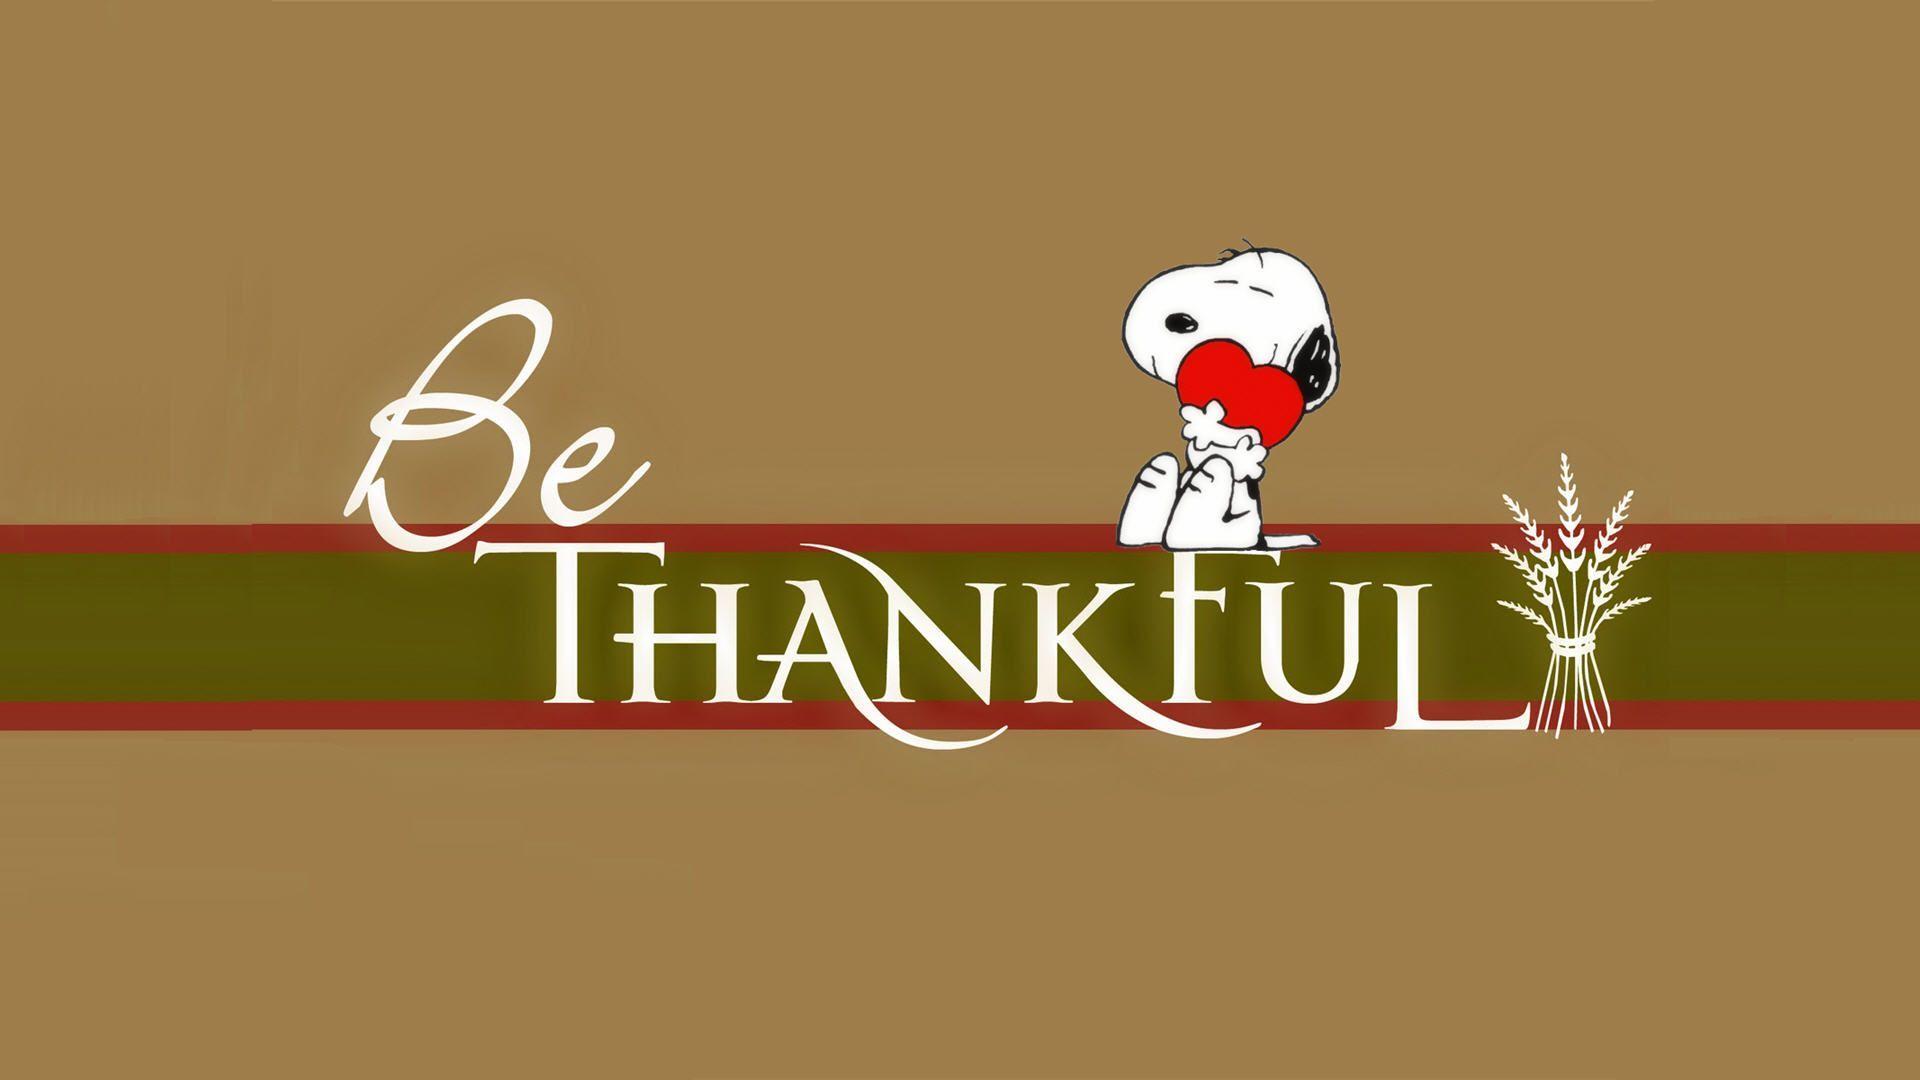 100 Charlie Brown Thanksgiving Background s  Wallpaperscom